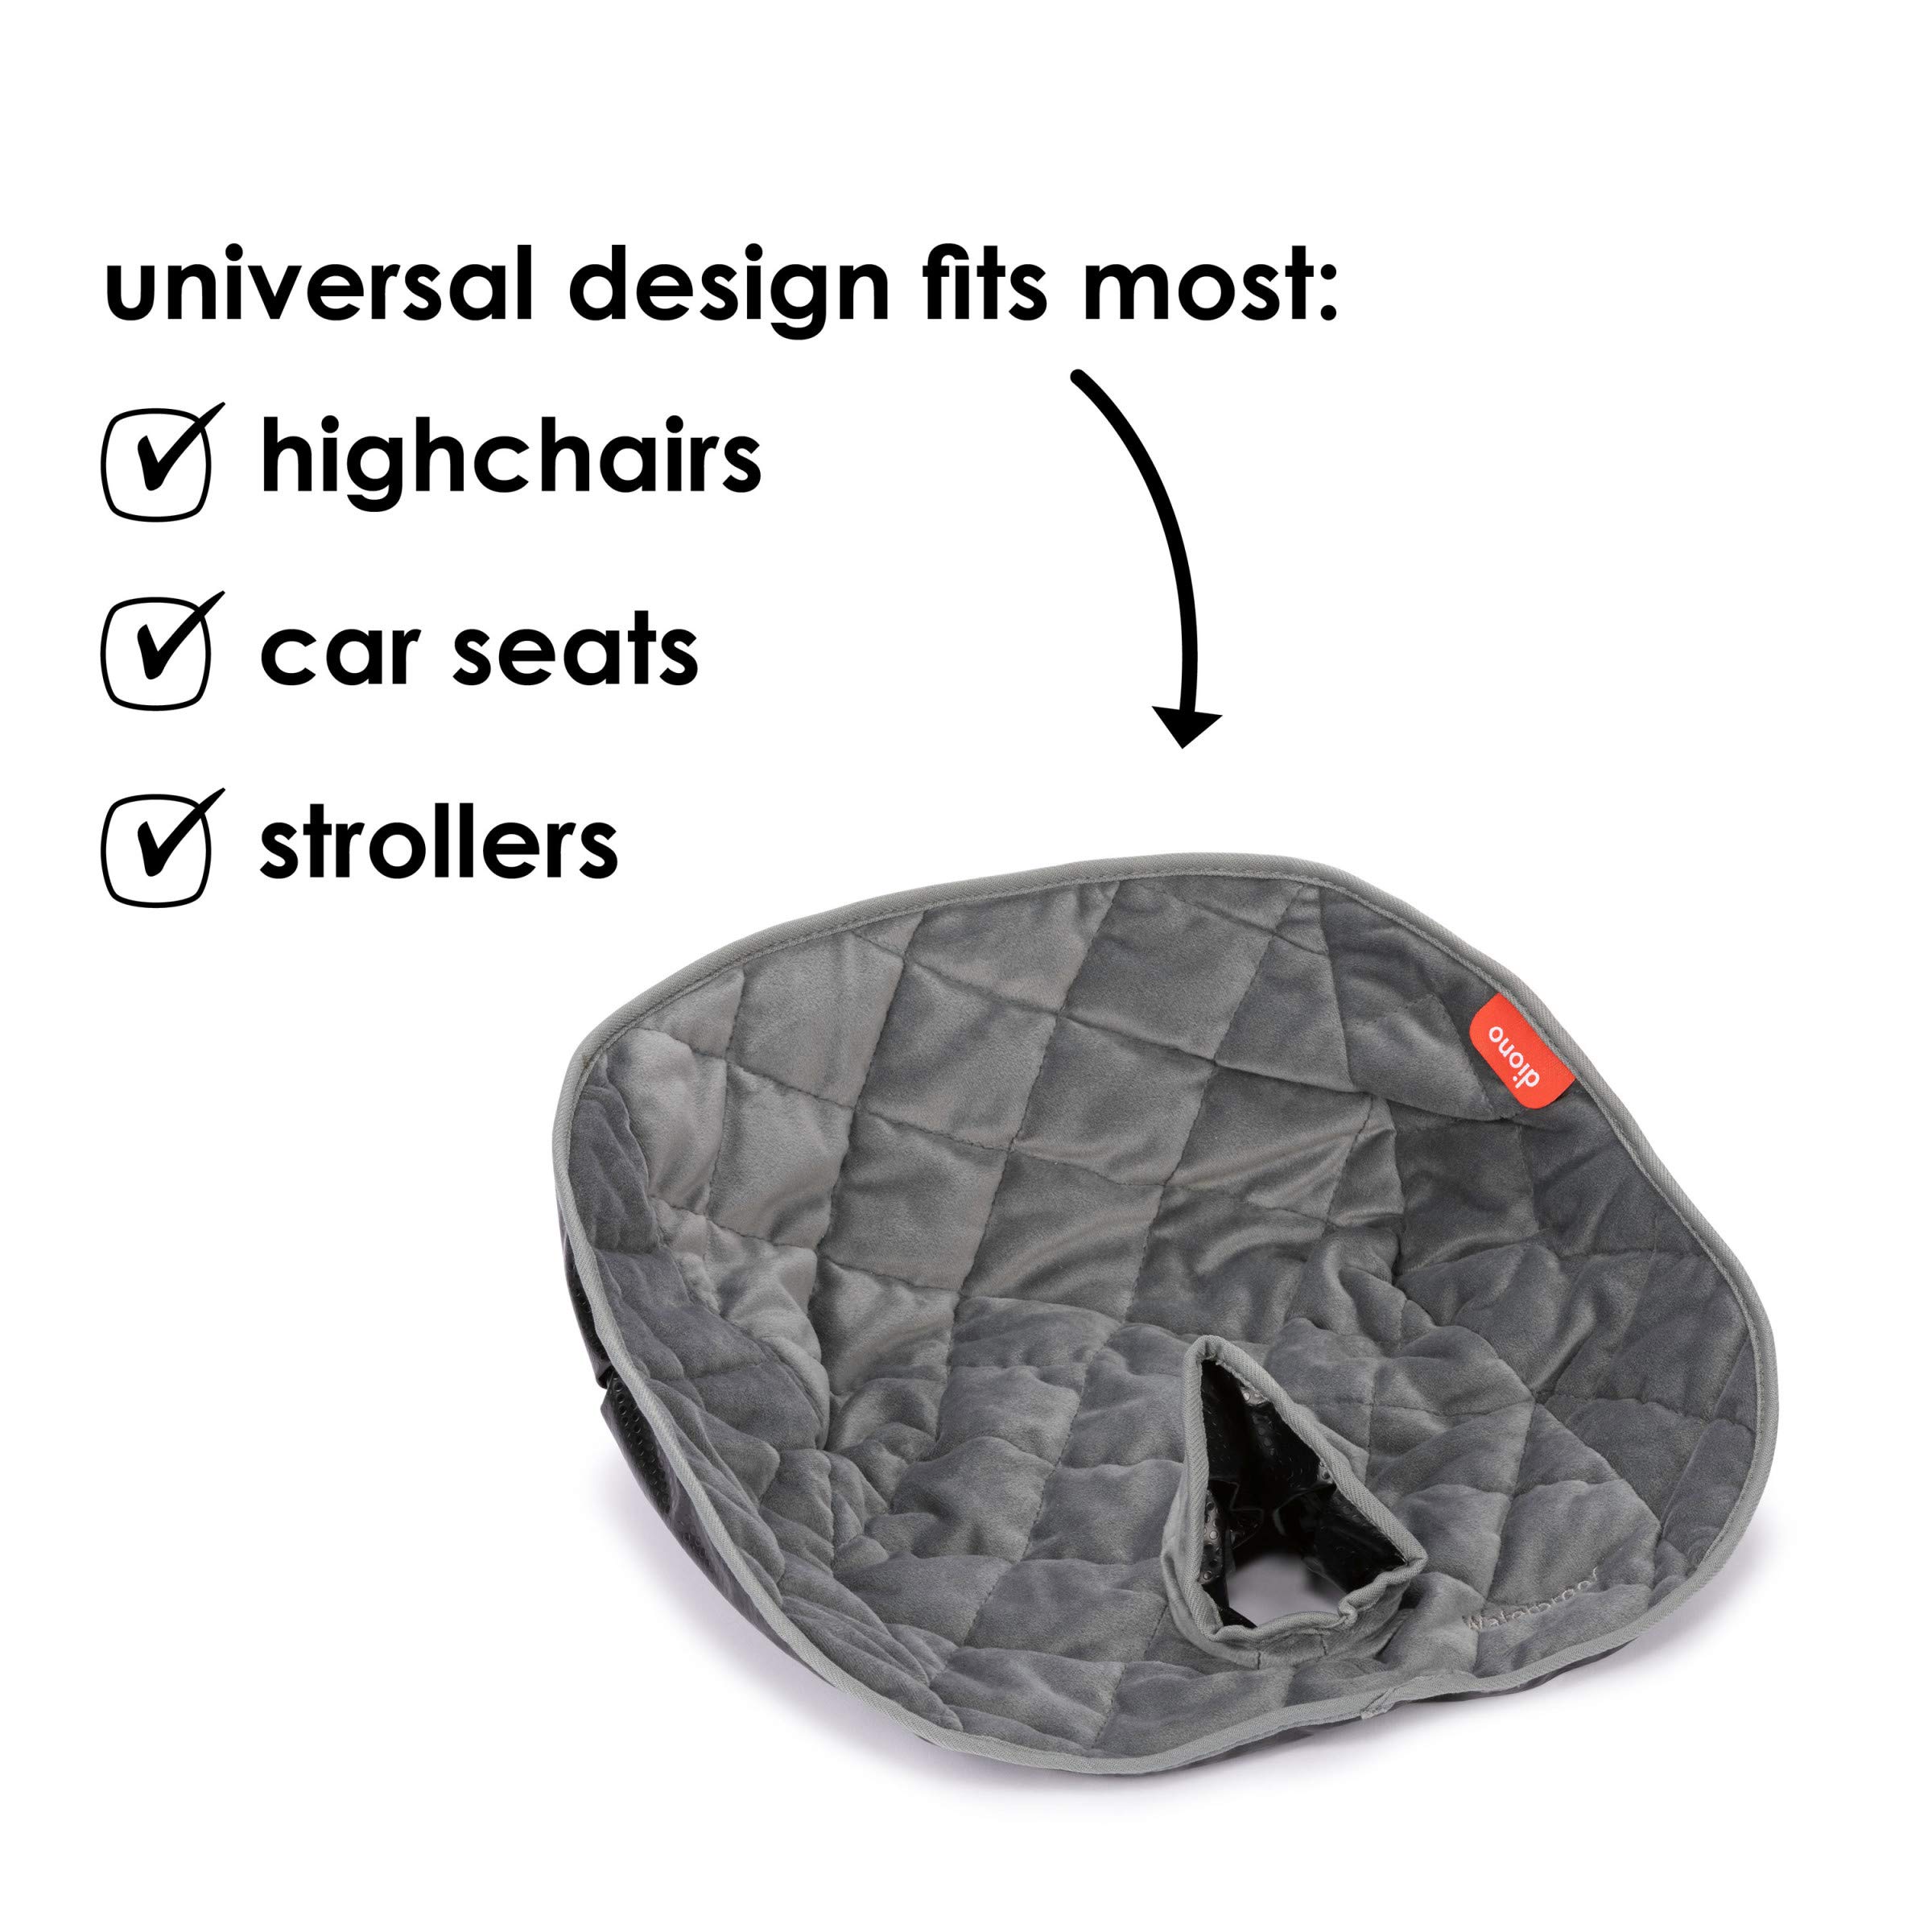 Diono Ultra Dry Seat, Child Car Seat Pad With Waterproof Liner - Potty Training Seat Pads for Infants Baby and Toddlers, Multi-Use for High Chair, Car Seats and Strollers, Machine Washable, Gray